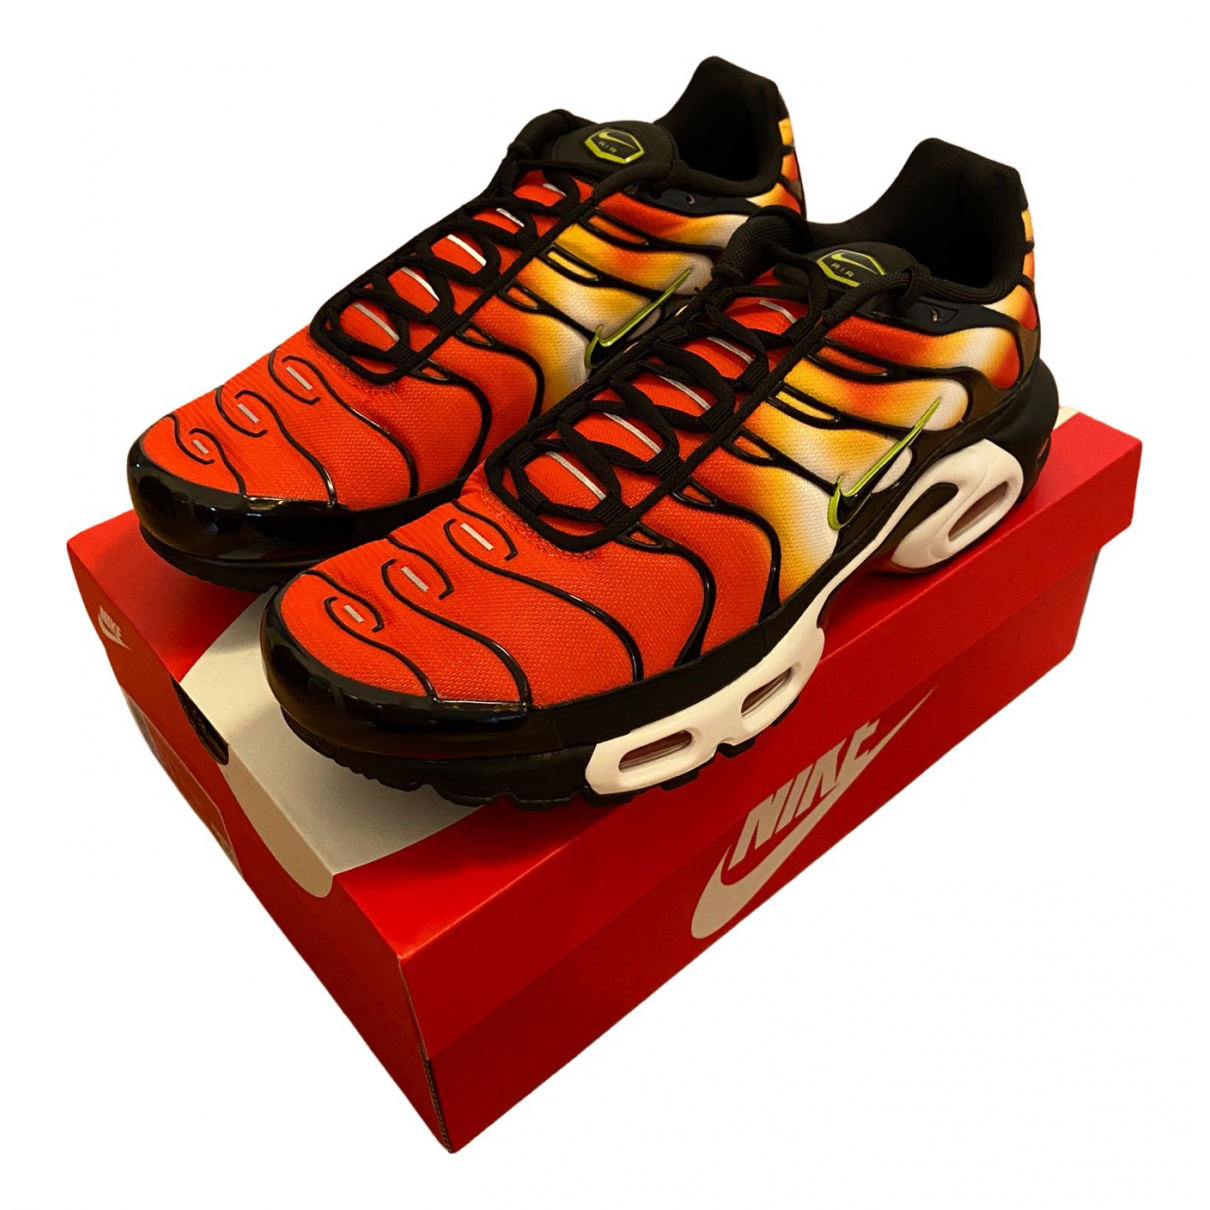 Super beauty product restock quality top Air Max Plus latest trainers low